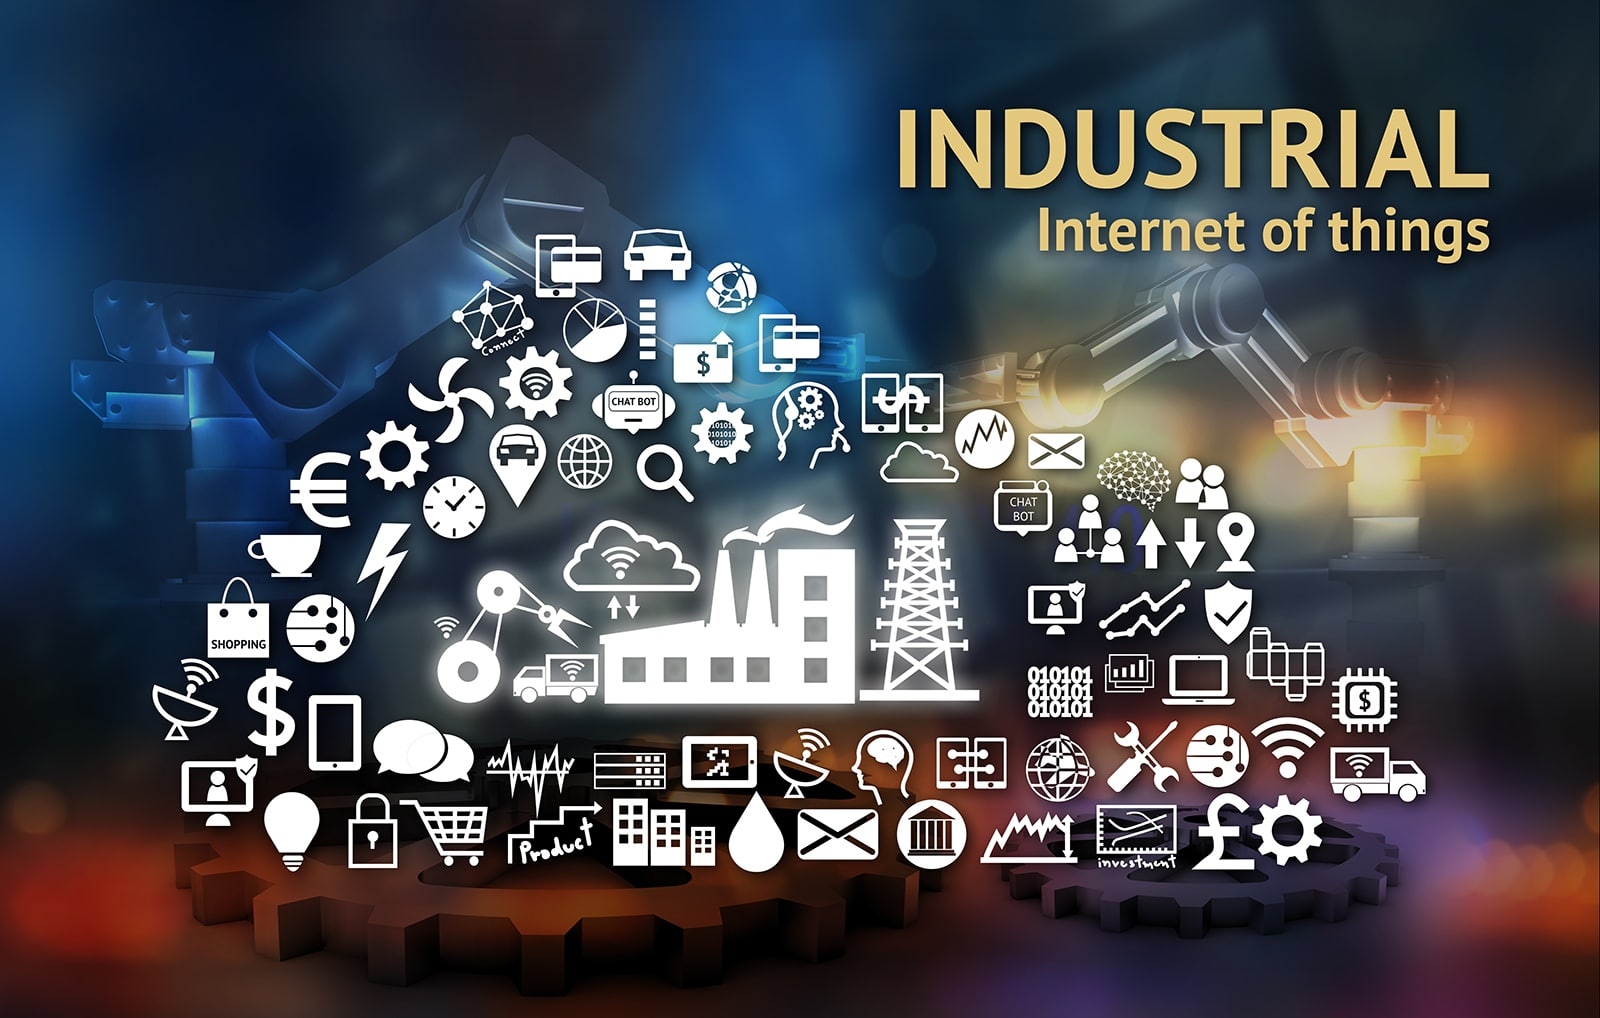 smeup industrial iot